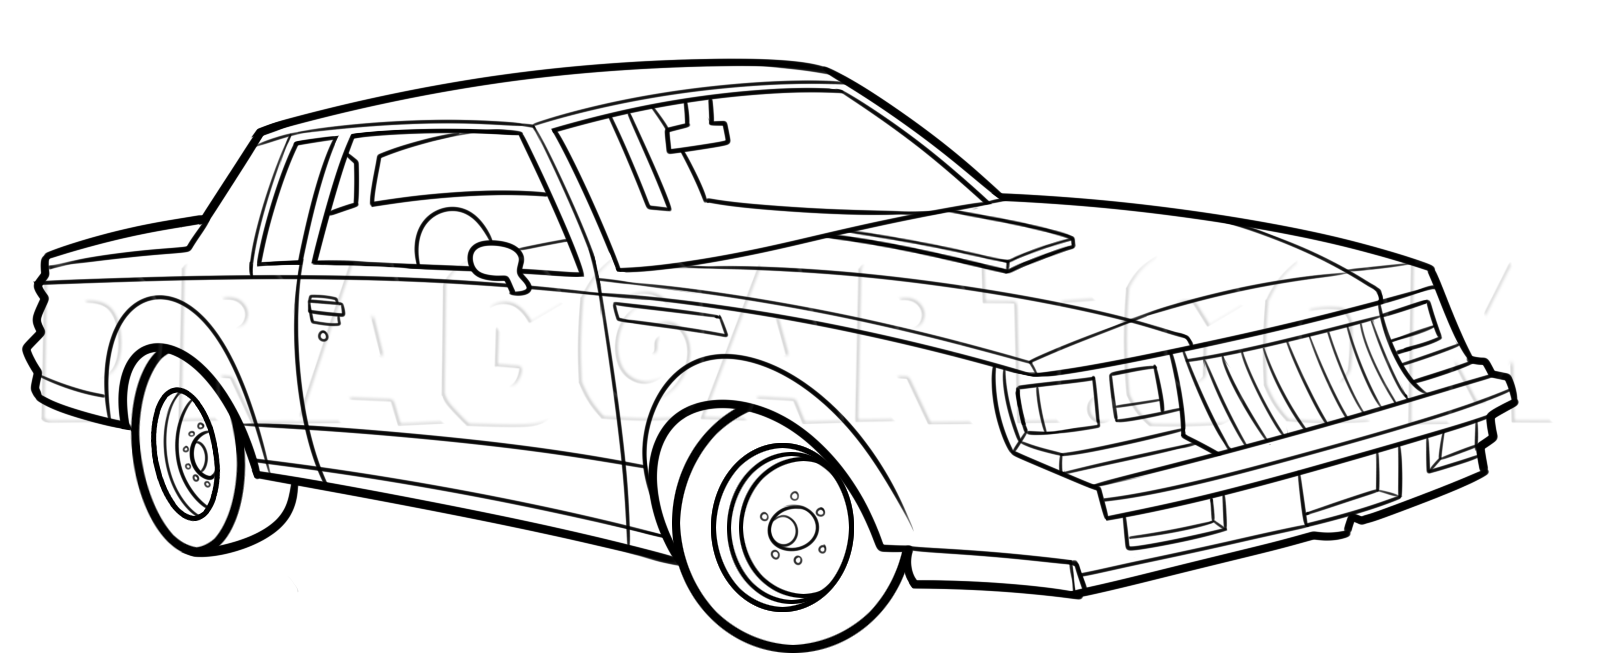 Buick Grand National Drawing Creative Style